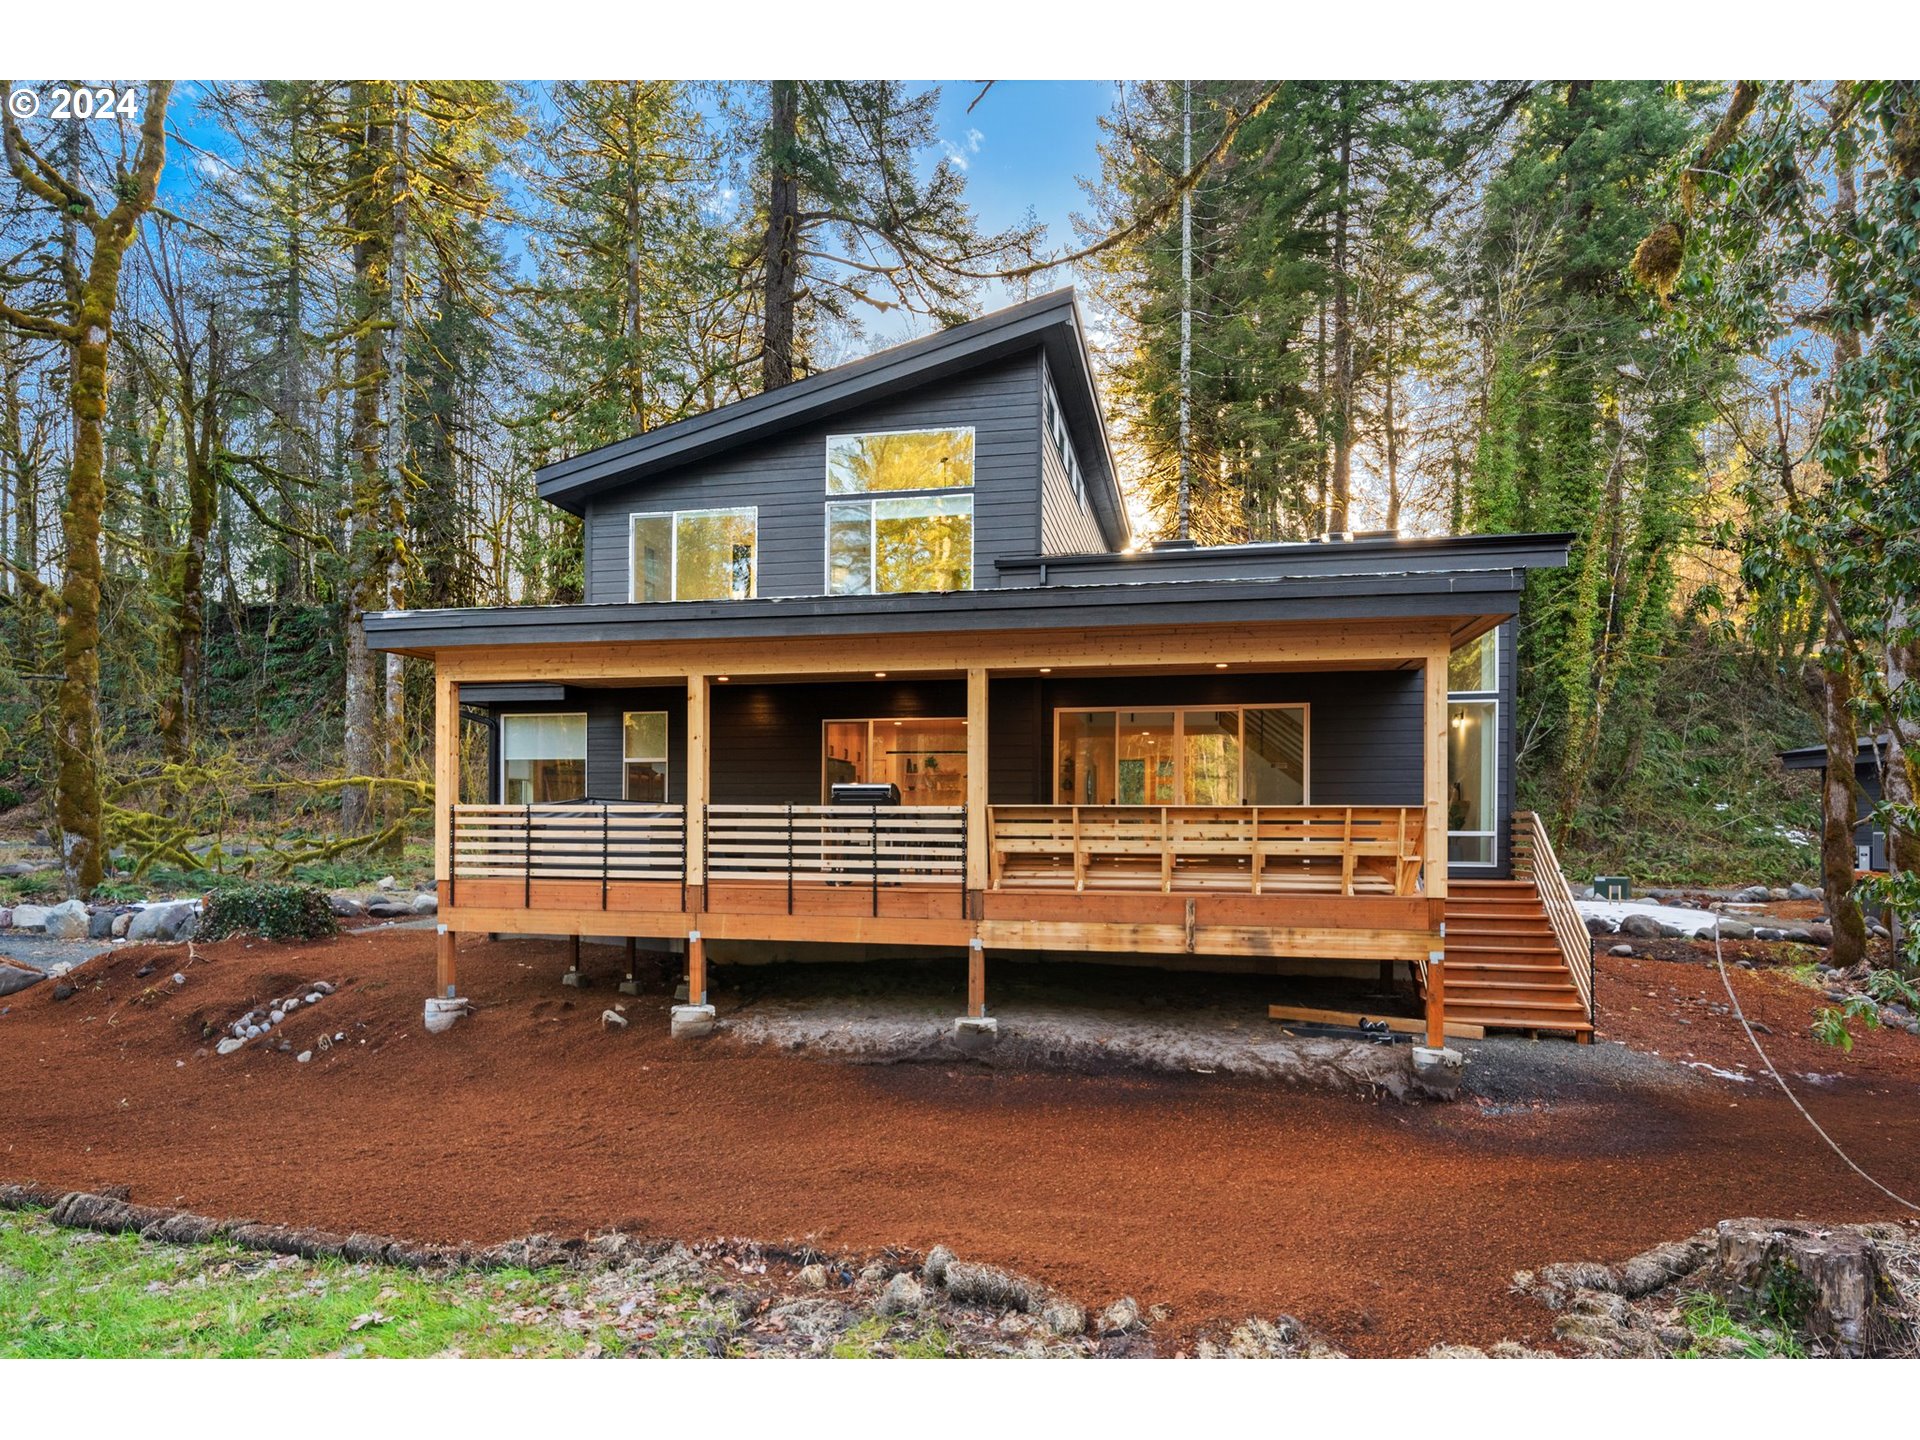 64315 E BRIGHTWOOD LOOP RD, Brightwood, OR 